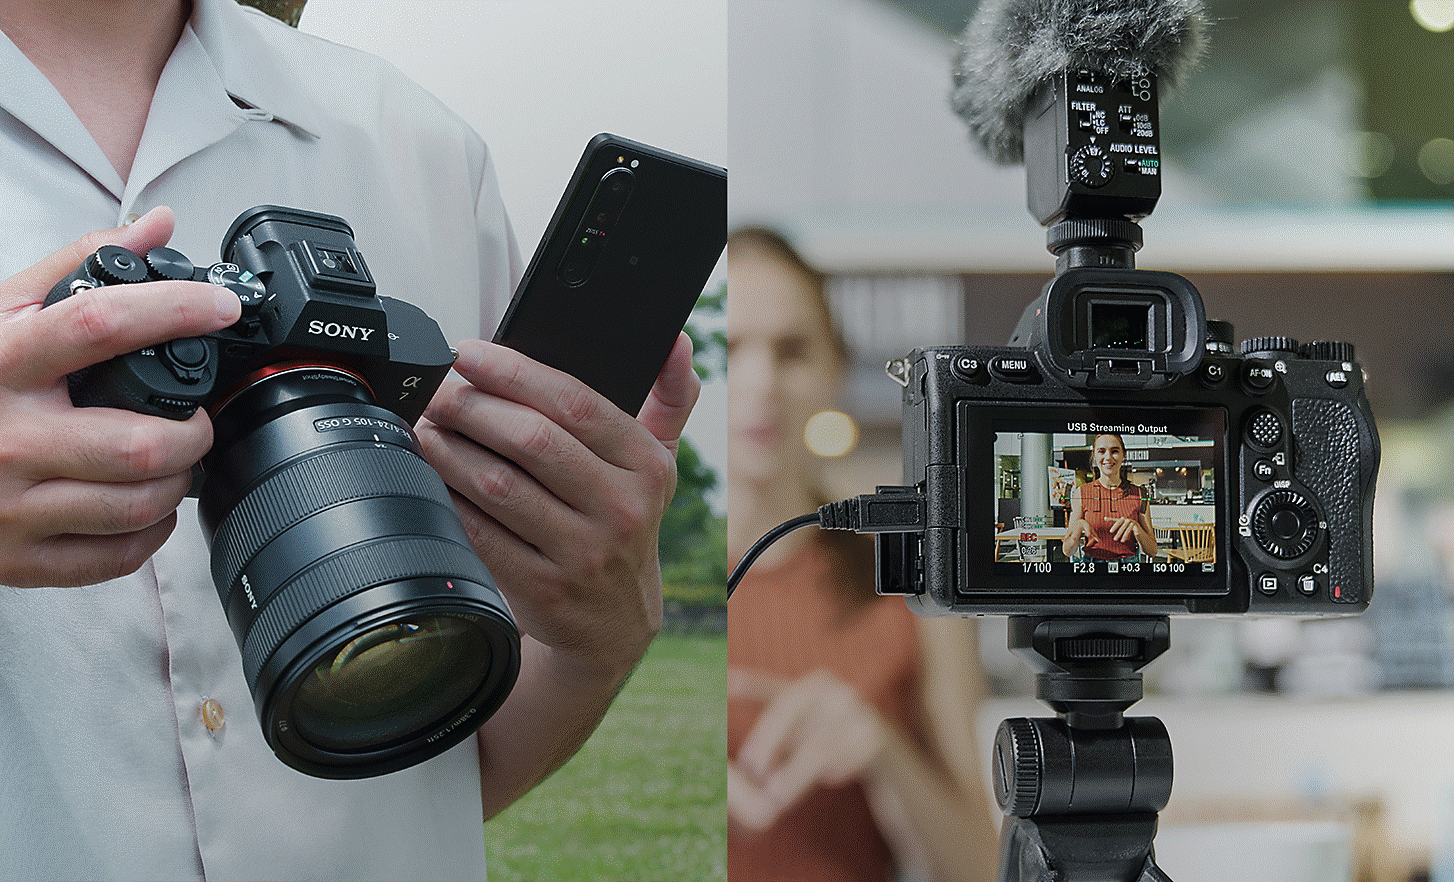 Left: photo of a person holding the α7 IV and a smartphone in order to share still photos or movies immediately after shooting; Right: photo of a person live-streaming with the α7 IV